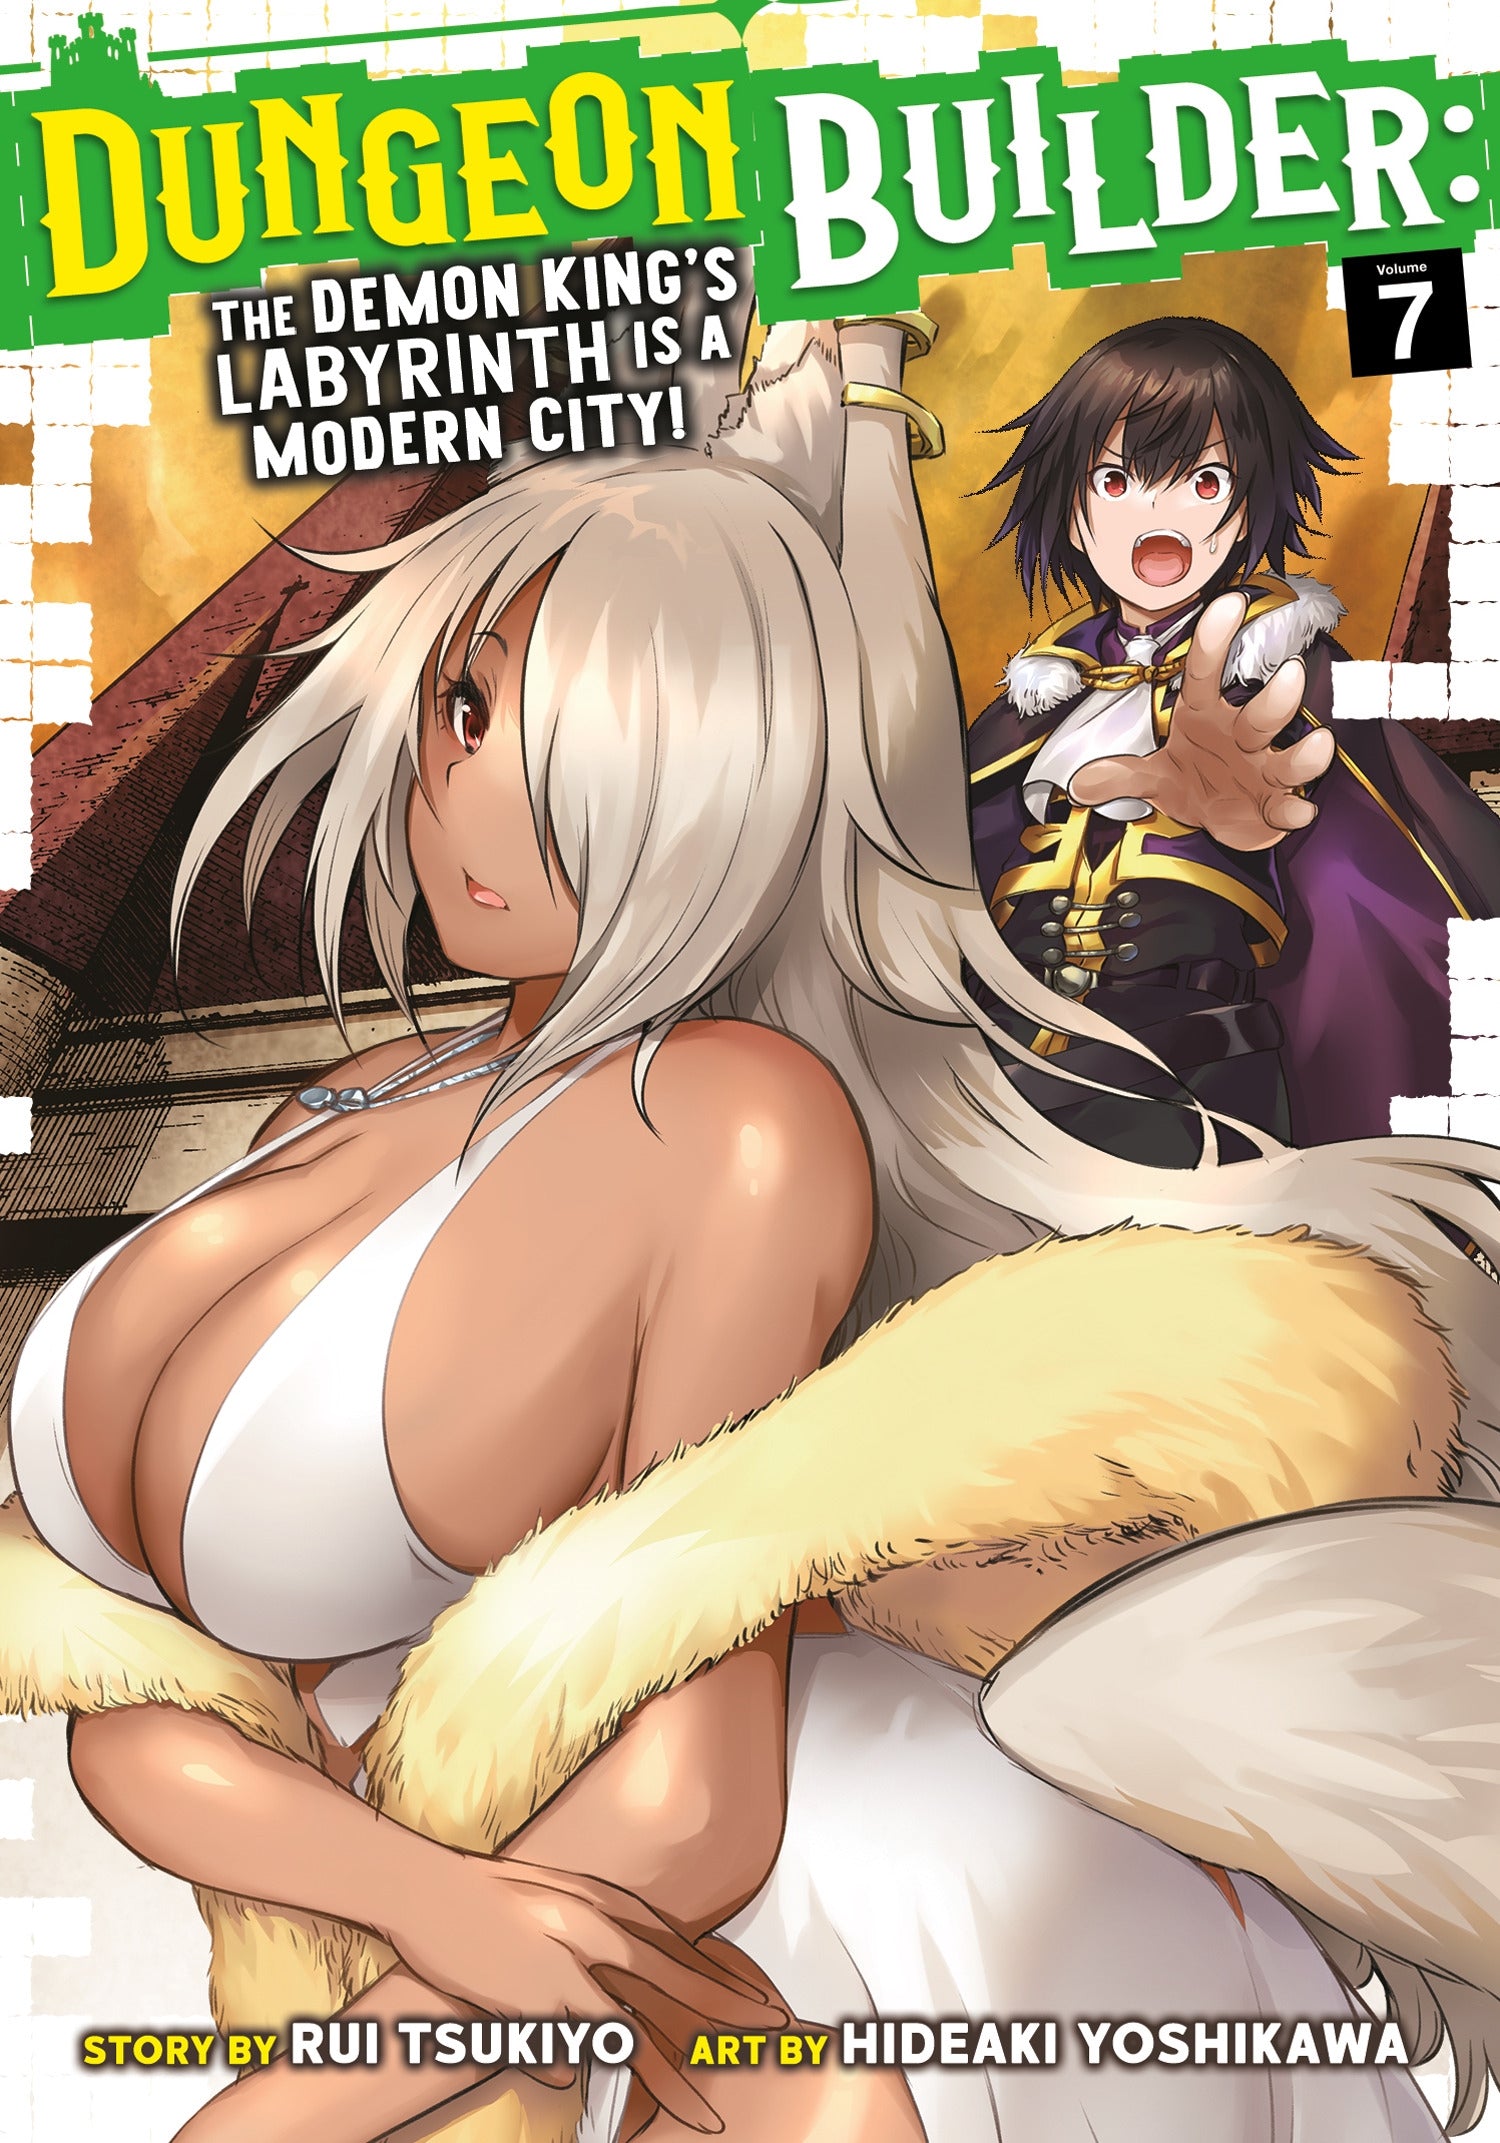 Dungeon Builder The Demon King's Labyrinth is a Modern City! (Manga) - Vol. 7